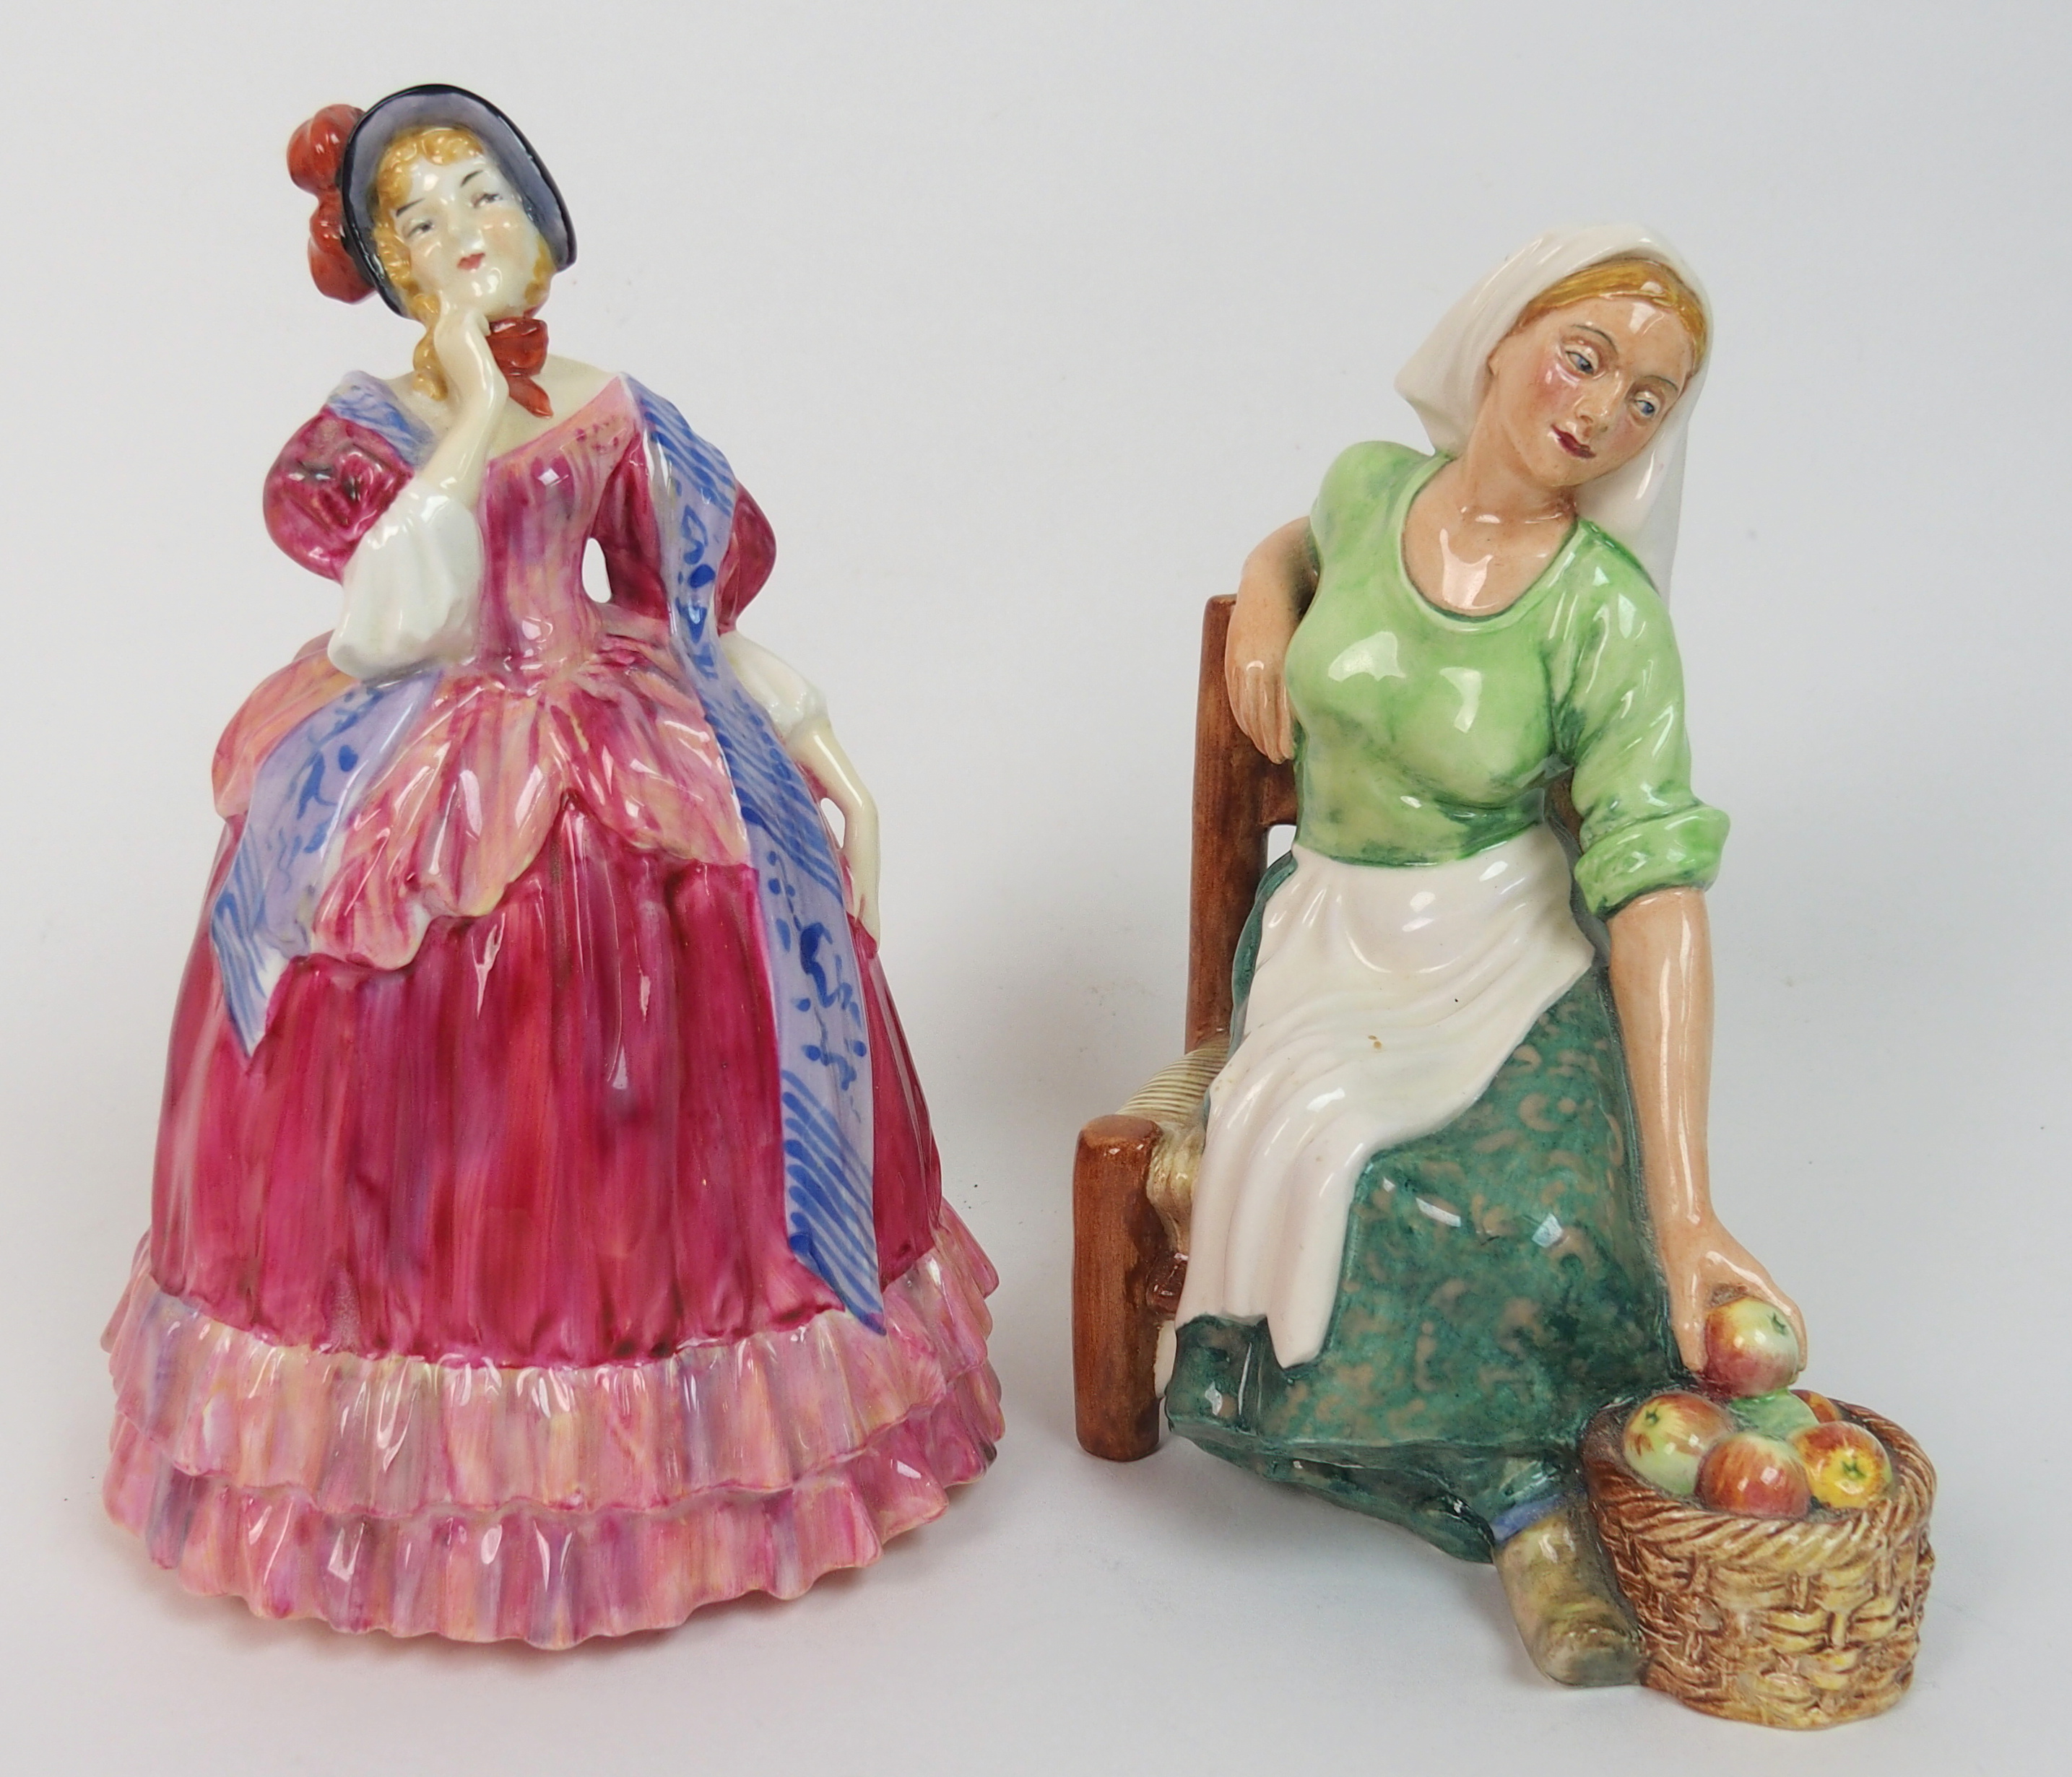 A Royal Doulton figurine 'Quality Street' HN1211 mistakenly marked by Doulton to the base as 'A